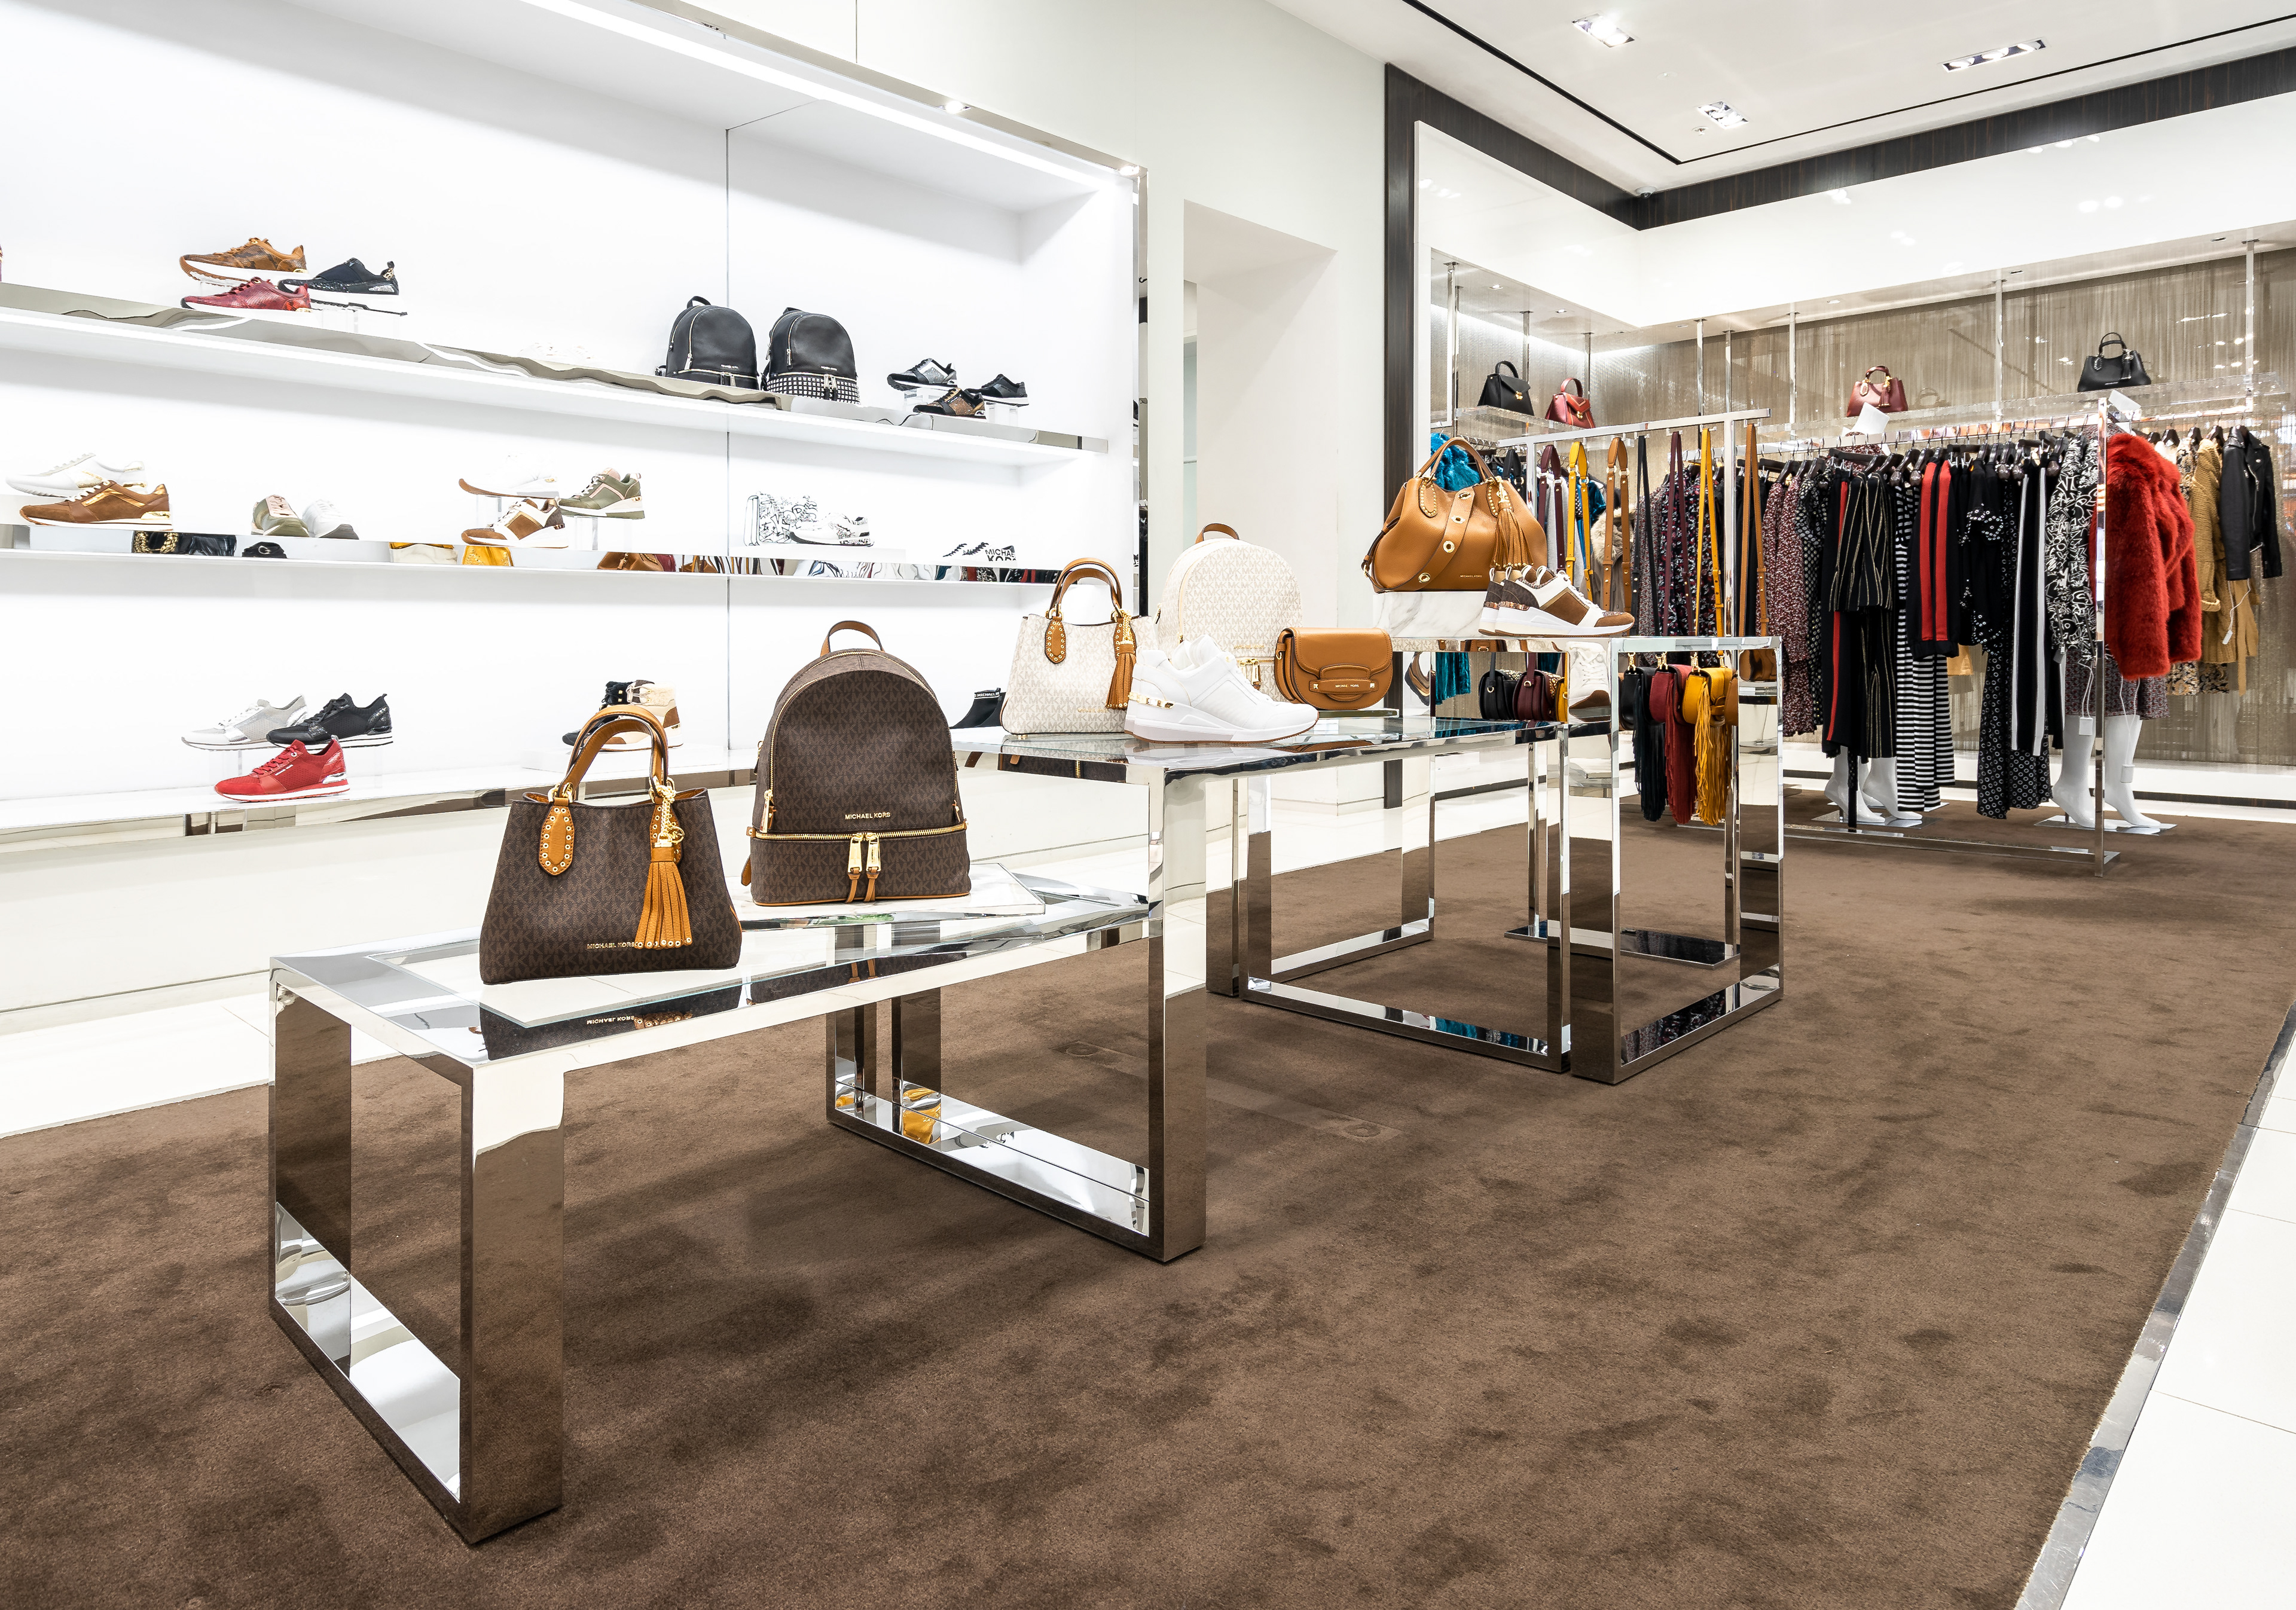 Interior and architecture photography - Michael Kors store, Vilnius